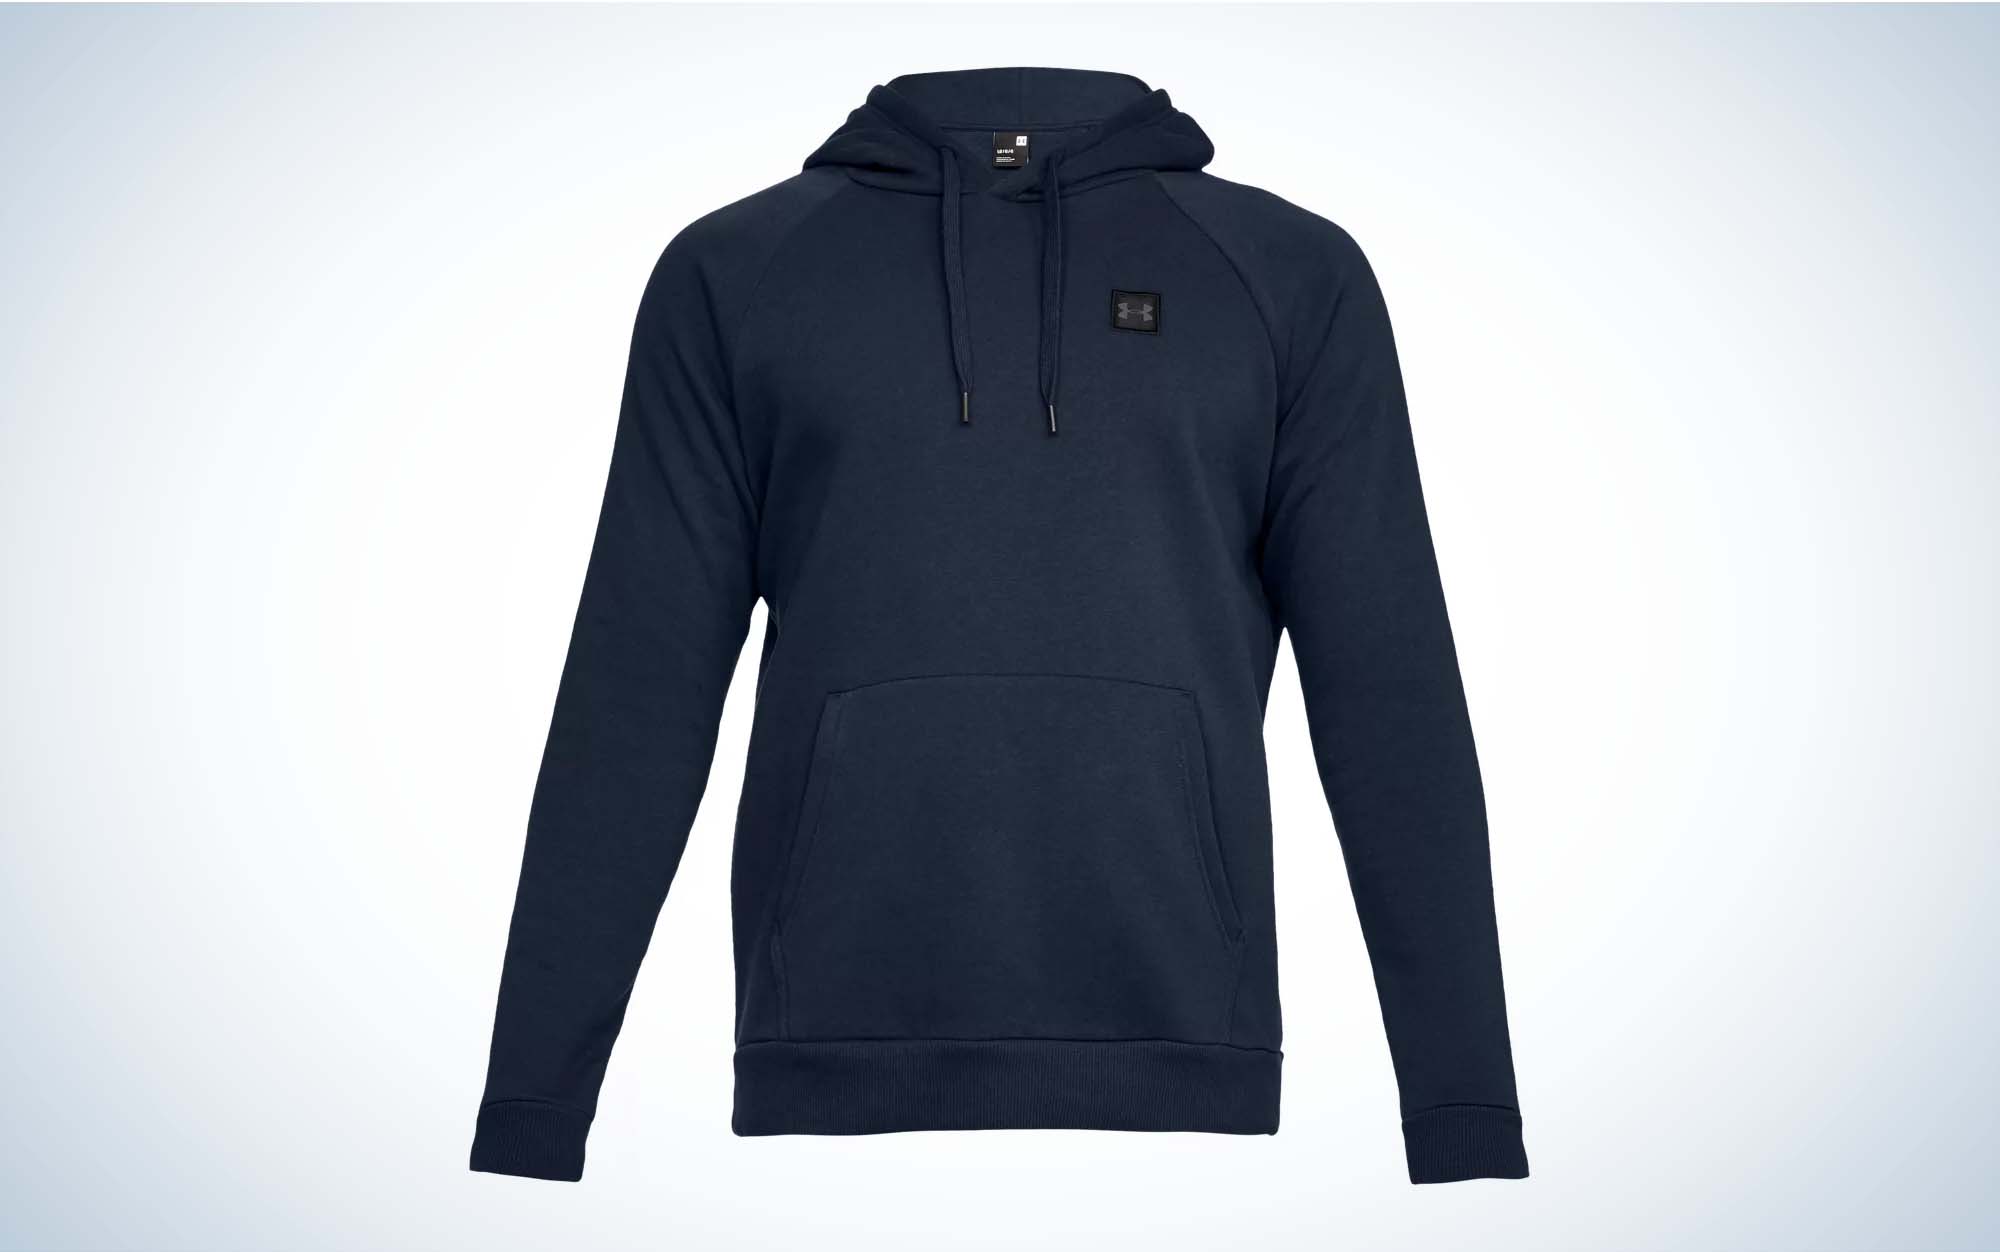 An Under Armour hoodie is the best Bass Pro Black Friday deal